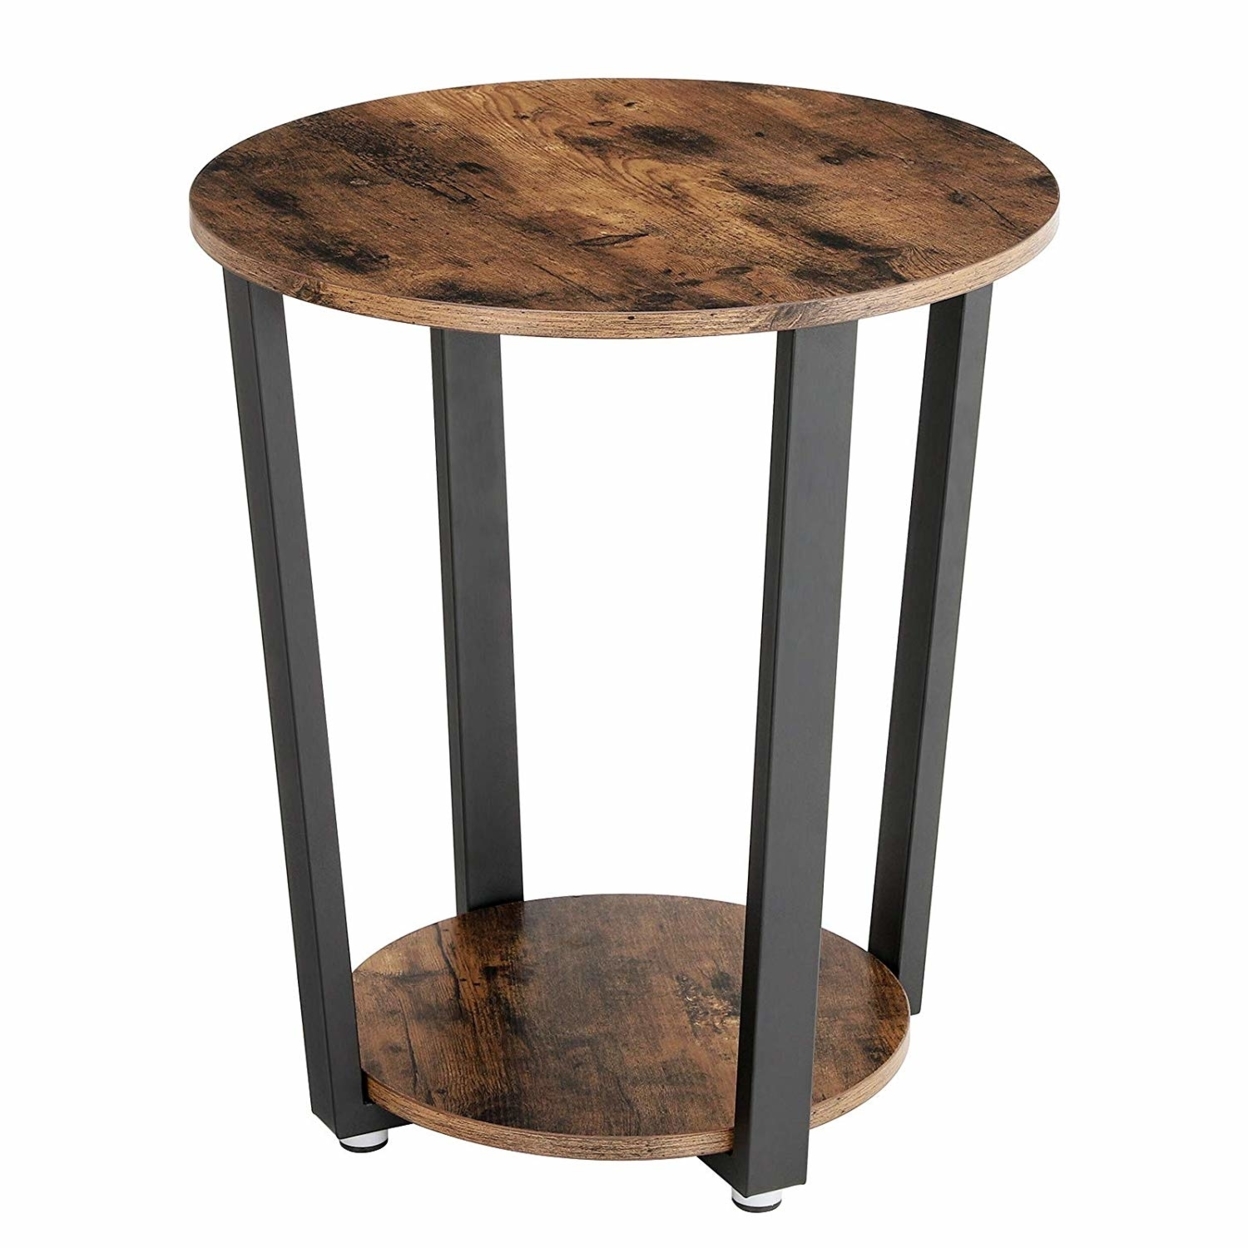 Stylish Iron And Wood End Table With Open Bottom Storage Shelf, Brown And Black- Saltoro Sherpi